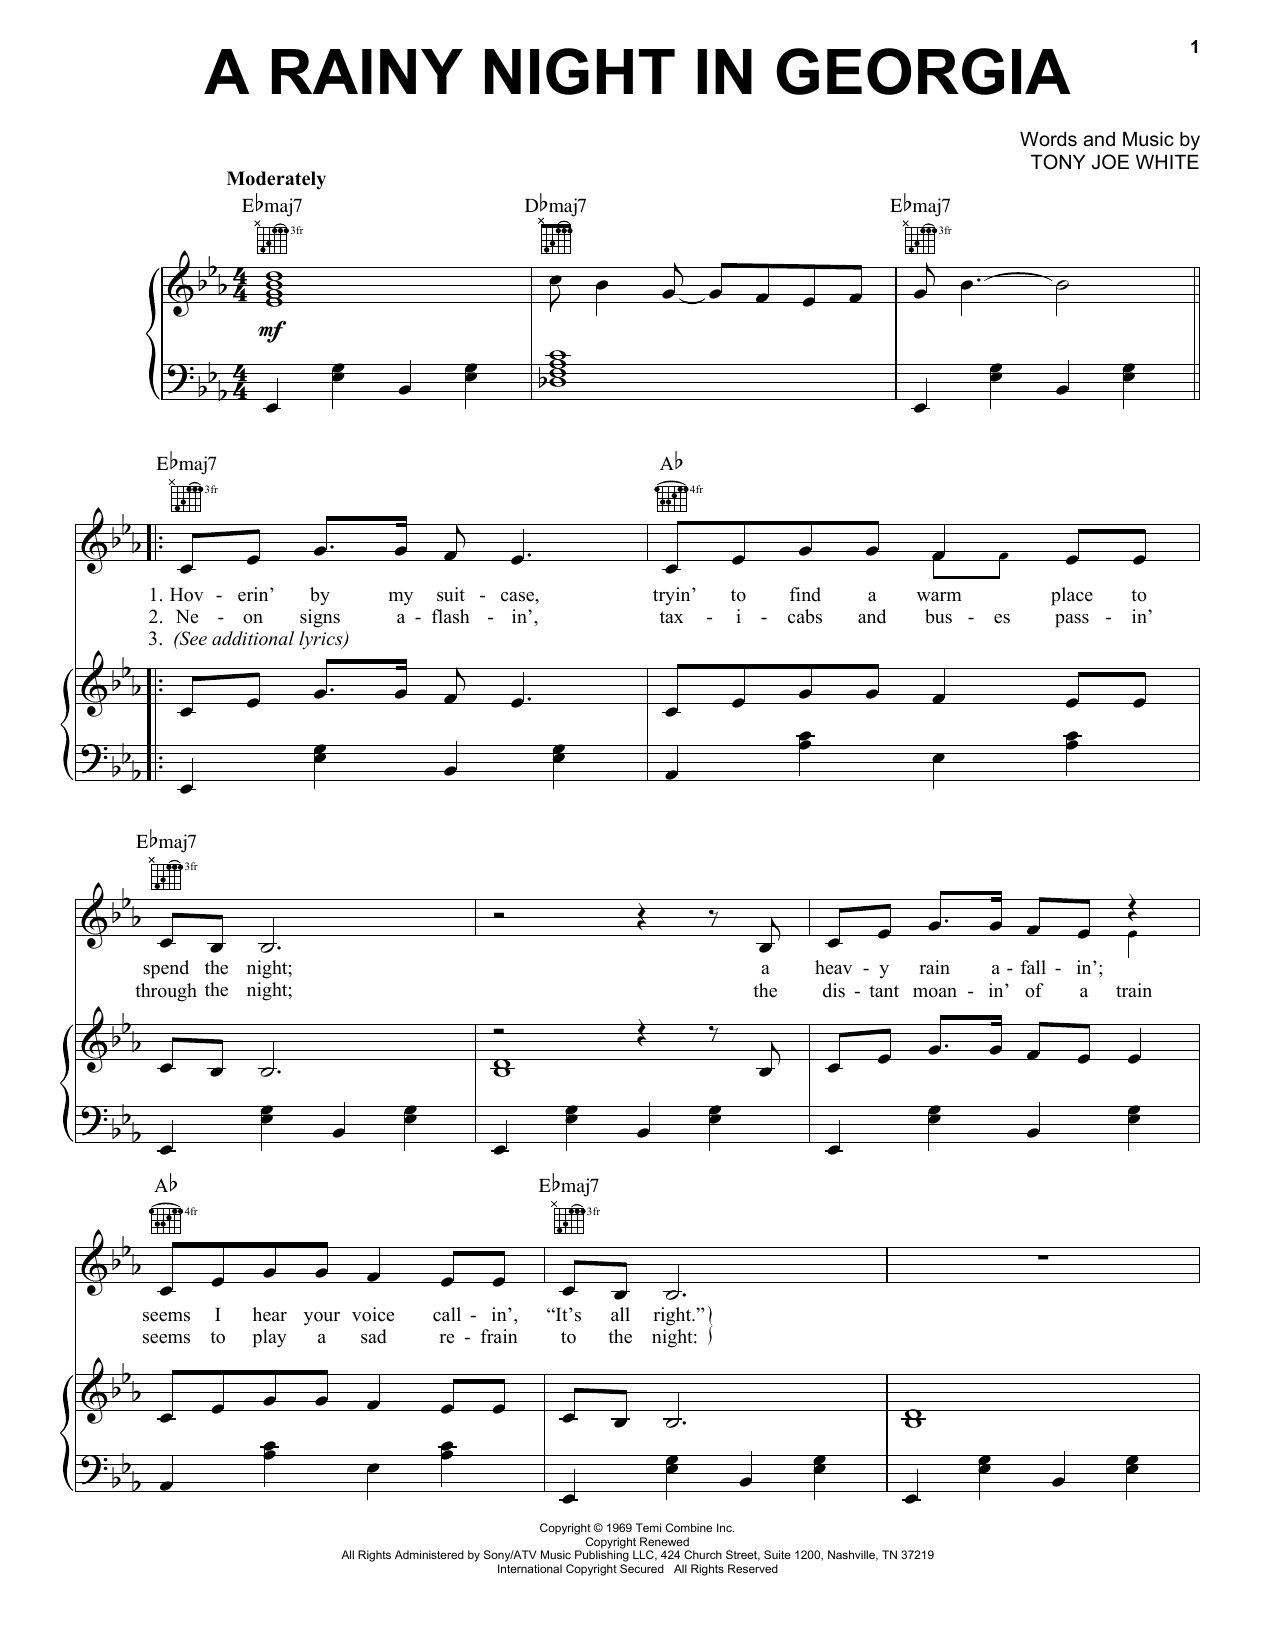 Download Brook Benton A Rainy Night In Georgia Sheet Music and Printable PDF Score for Very Easy Piano